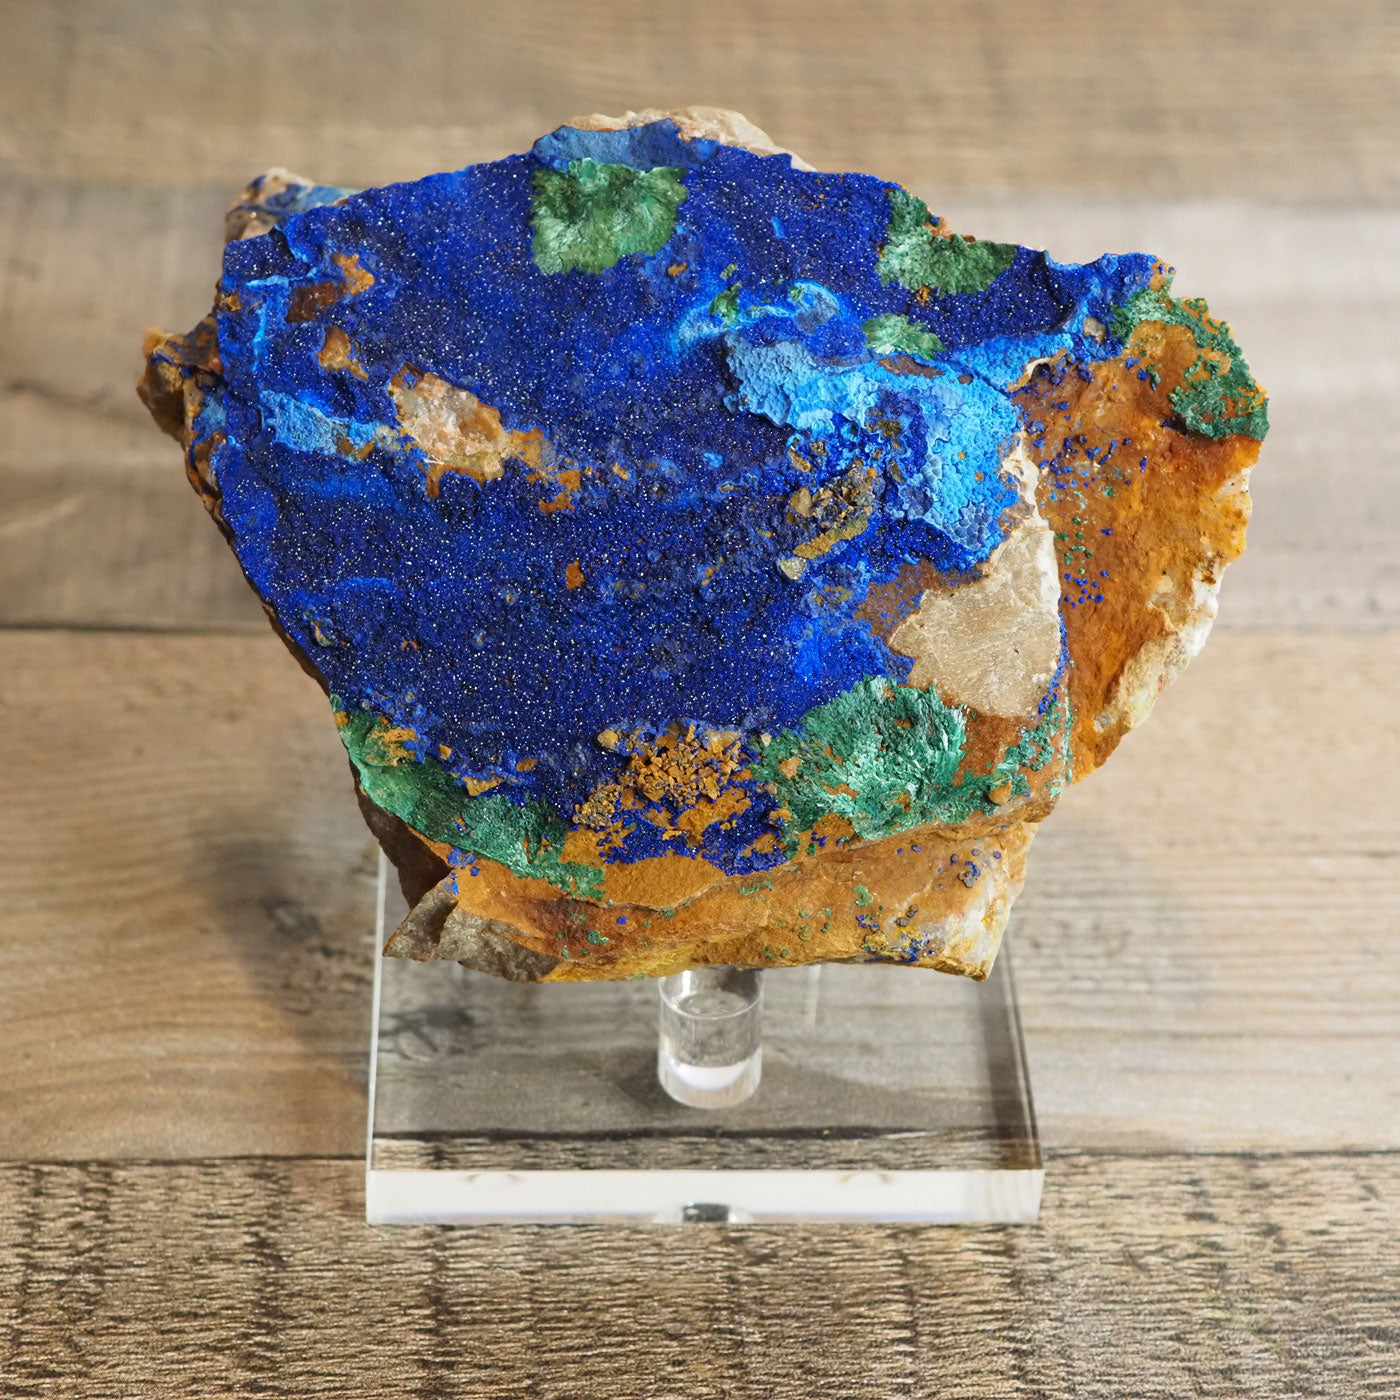 4.2" long Sparkly Azurite with Fibrous Malachite